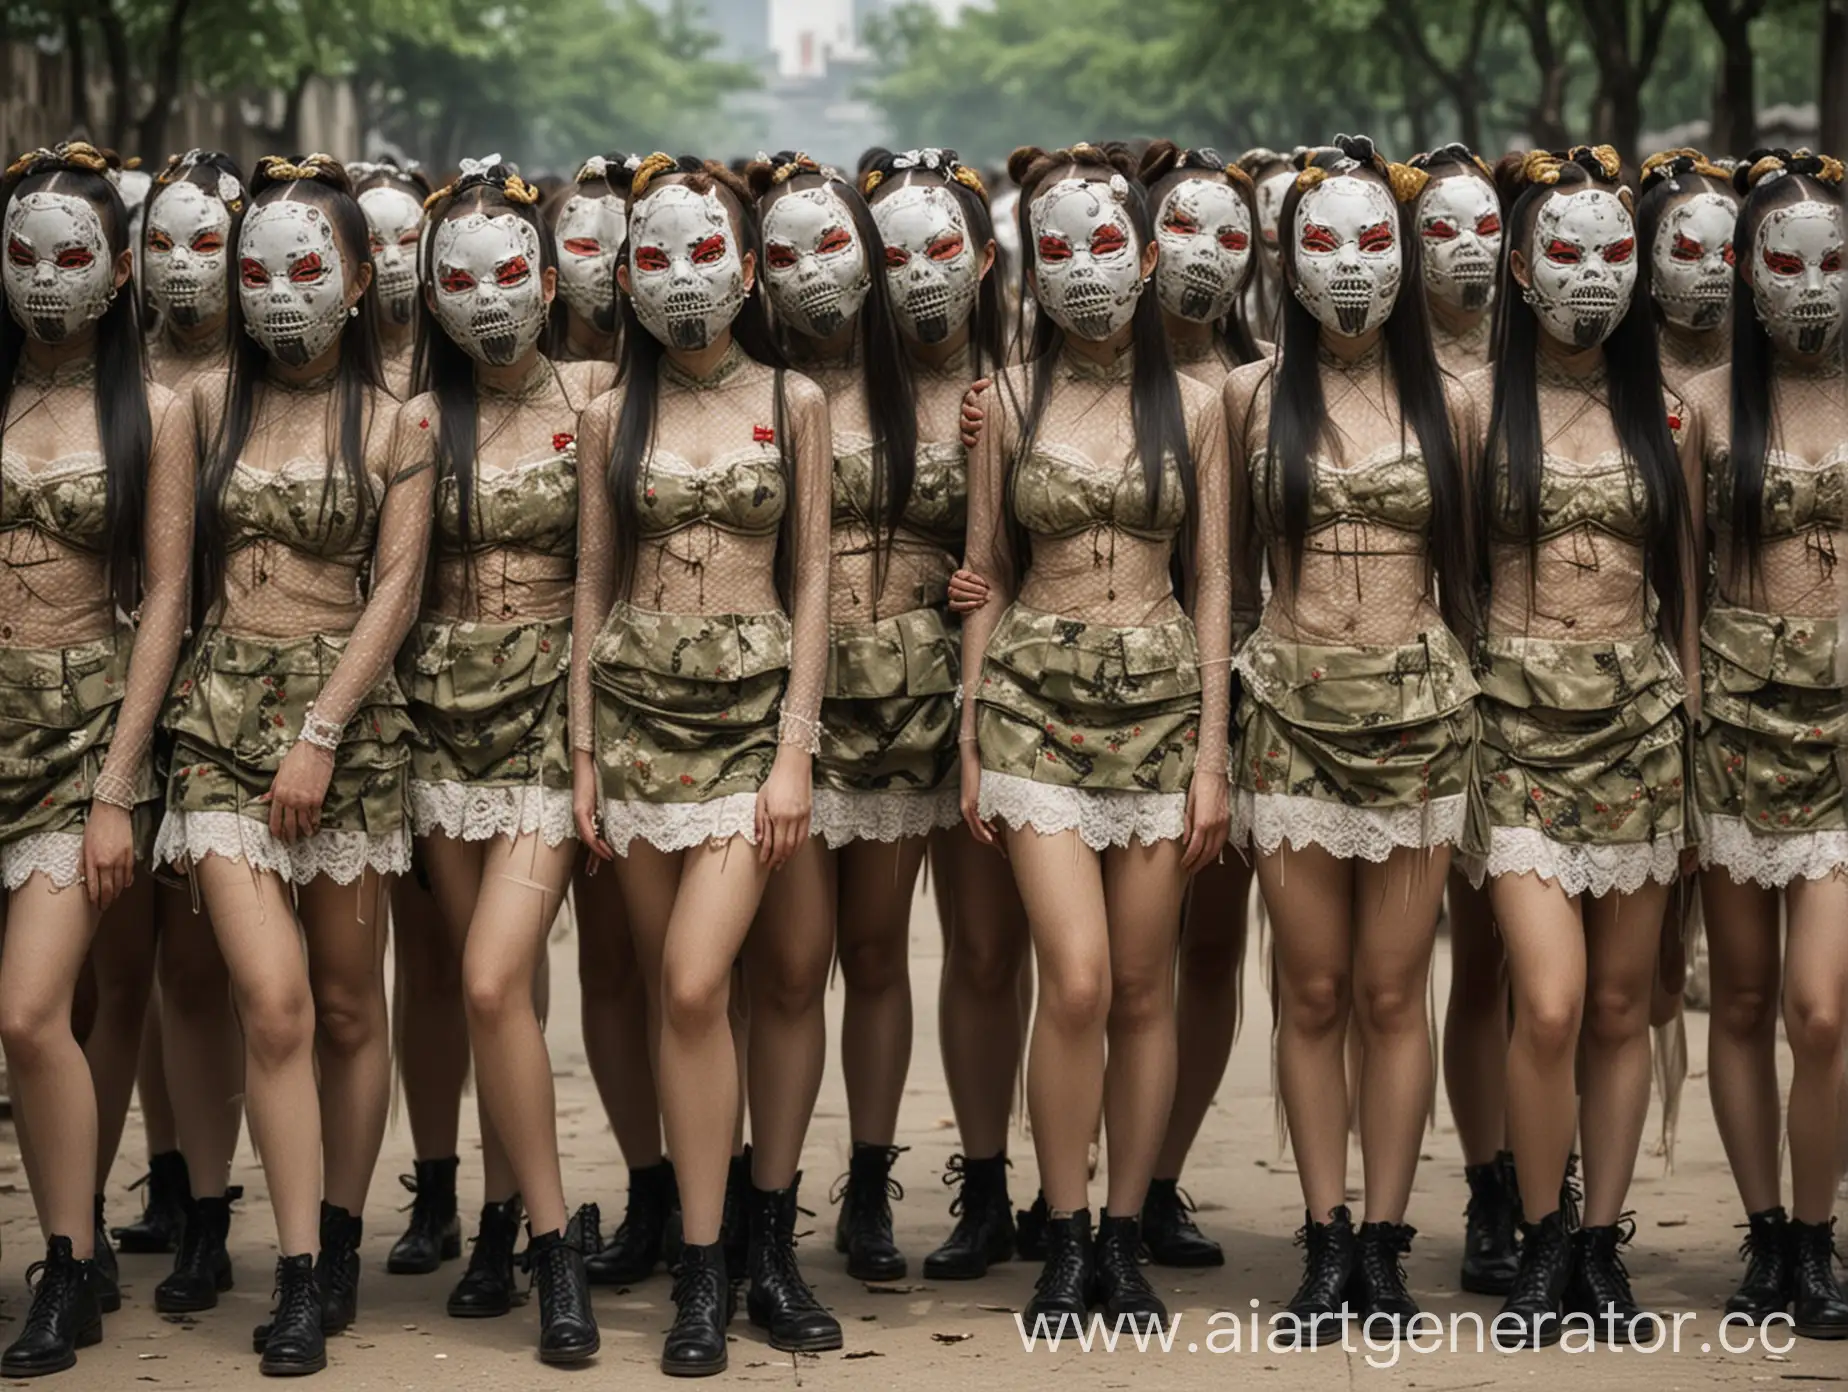 Elite-Female-Soldiers-in-Skullfaced-Masks-Invade-Country